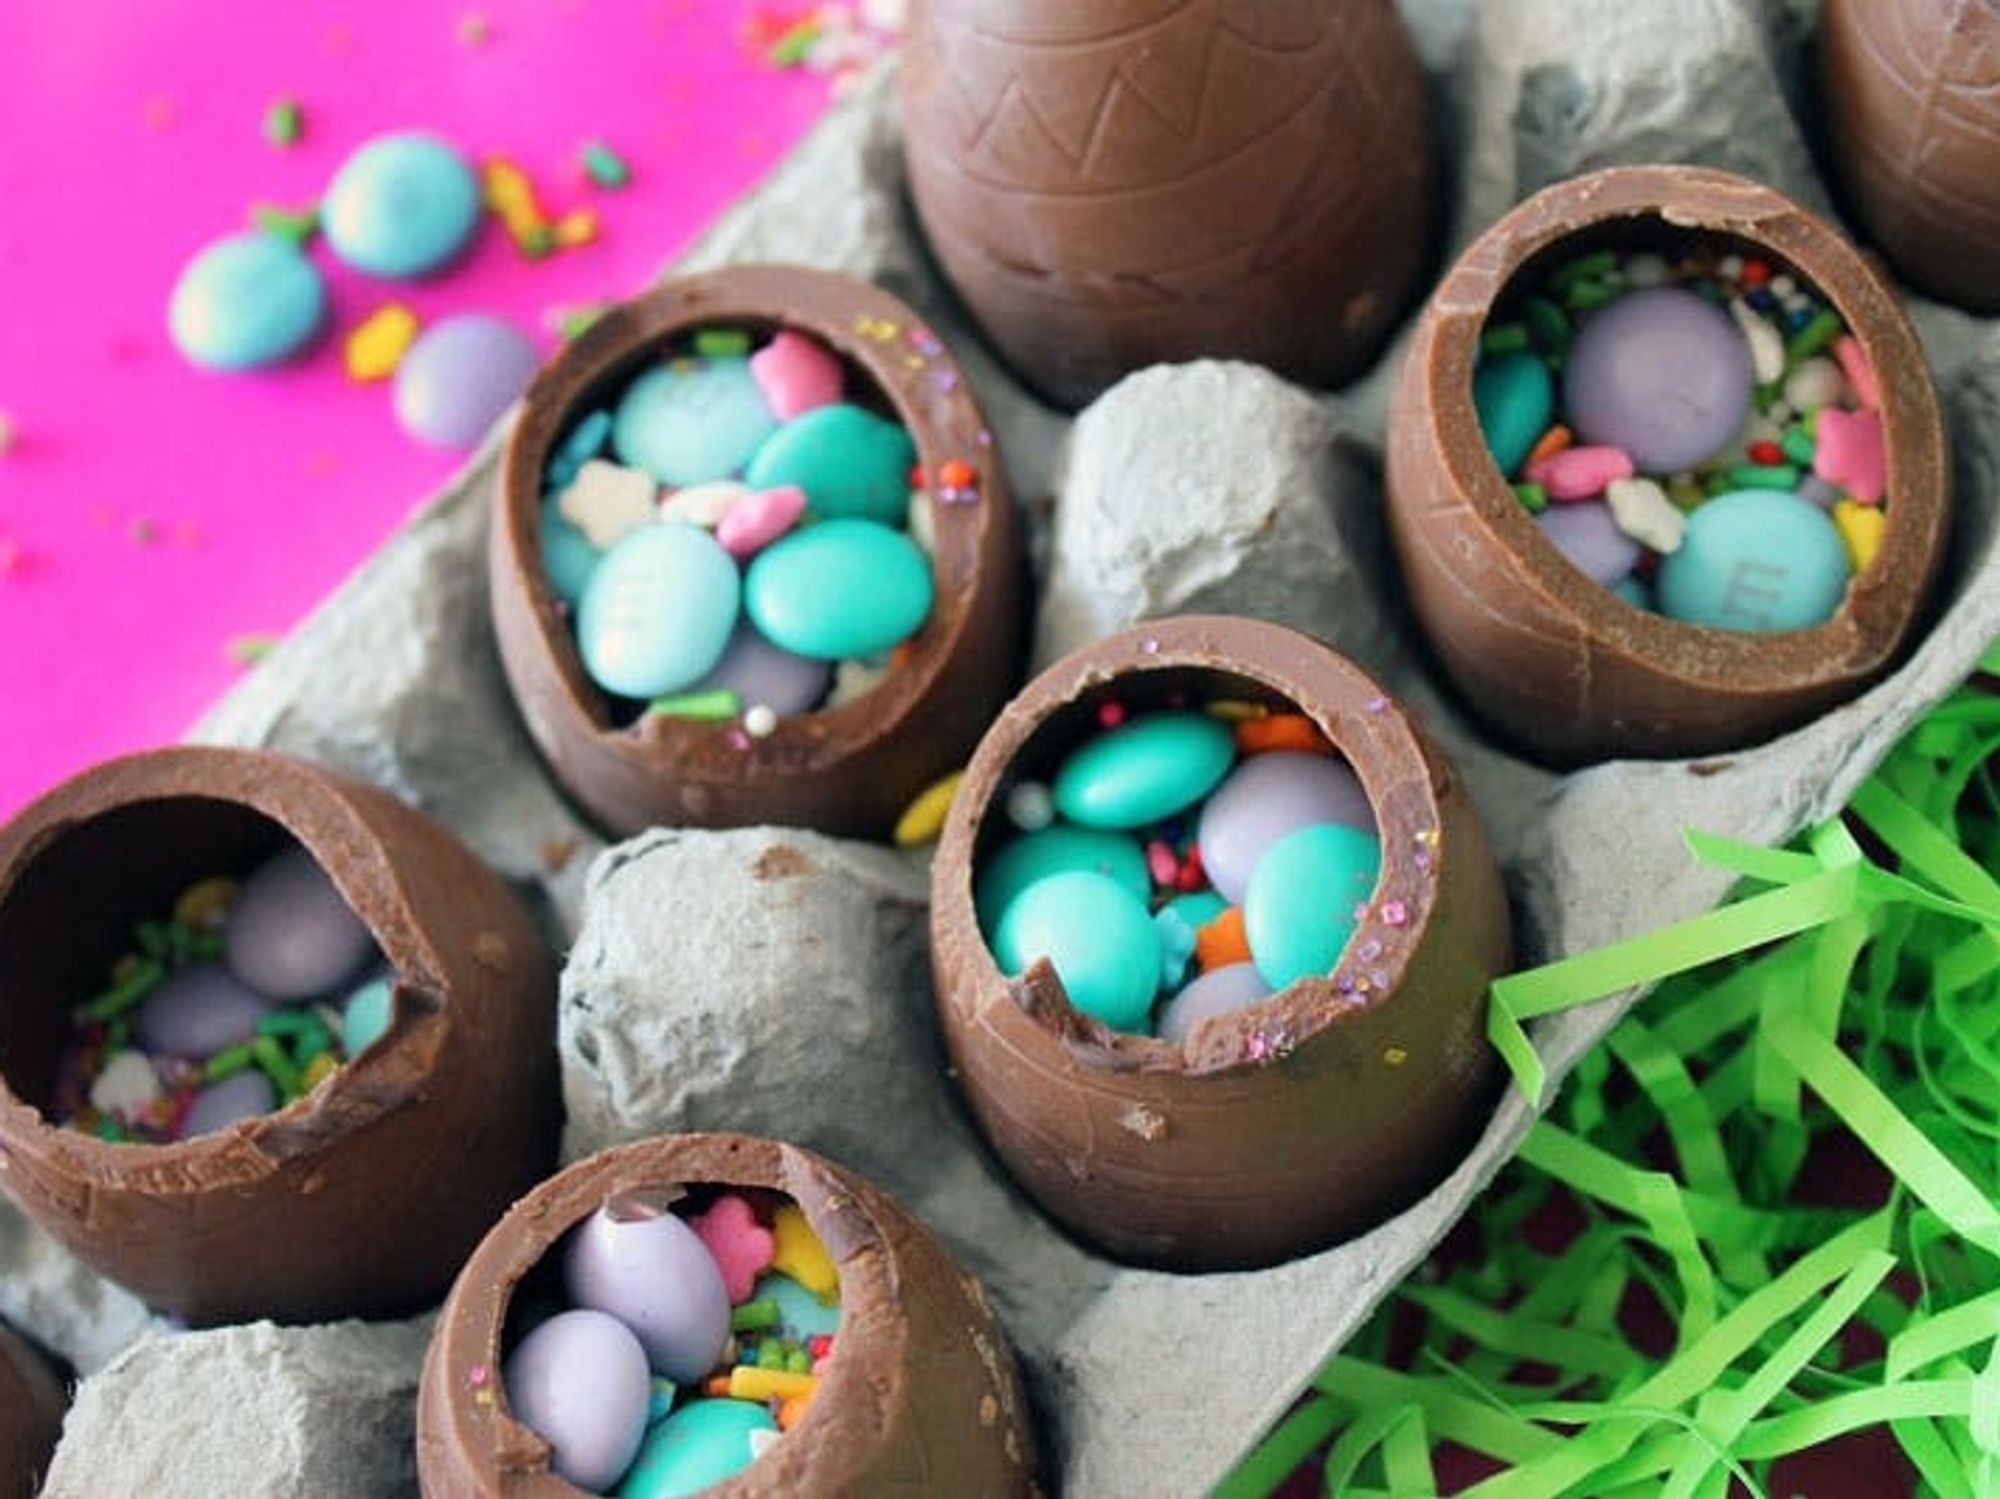 How to Make Hollow Chocolate Eggs + Video - I Sugar Coat It